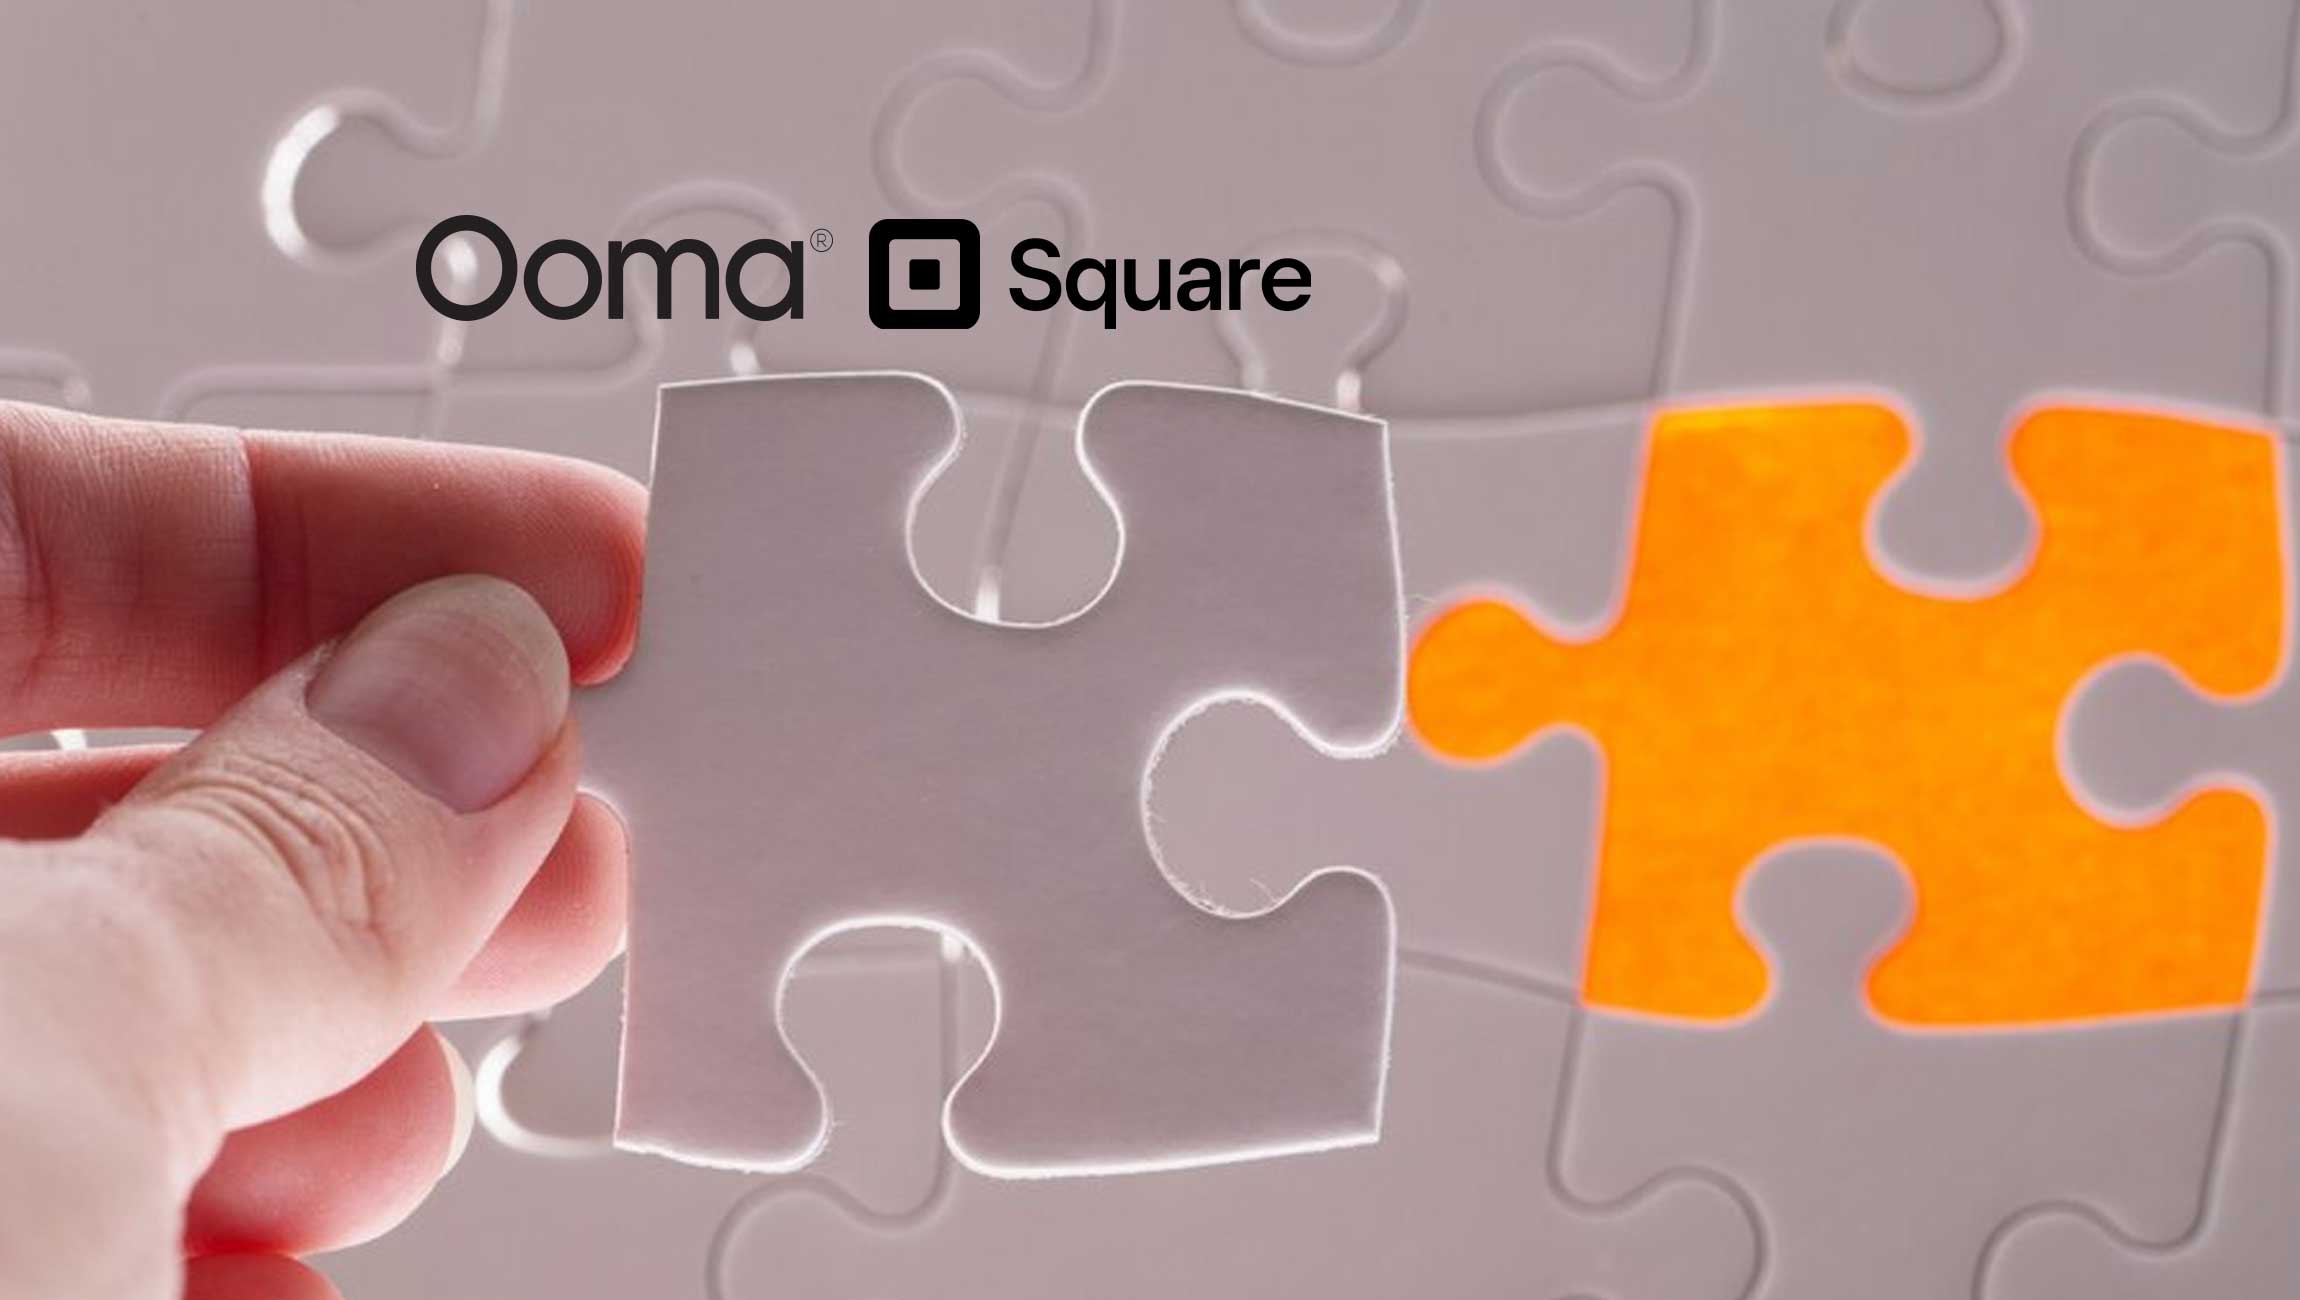 Ooma Office Phone Service Now Integrates with Square, Delivering More Personal Customer Experiences